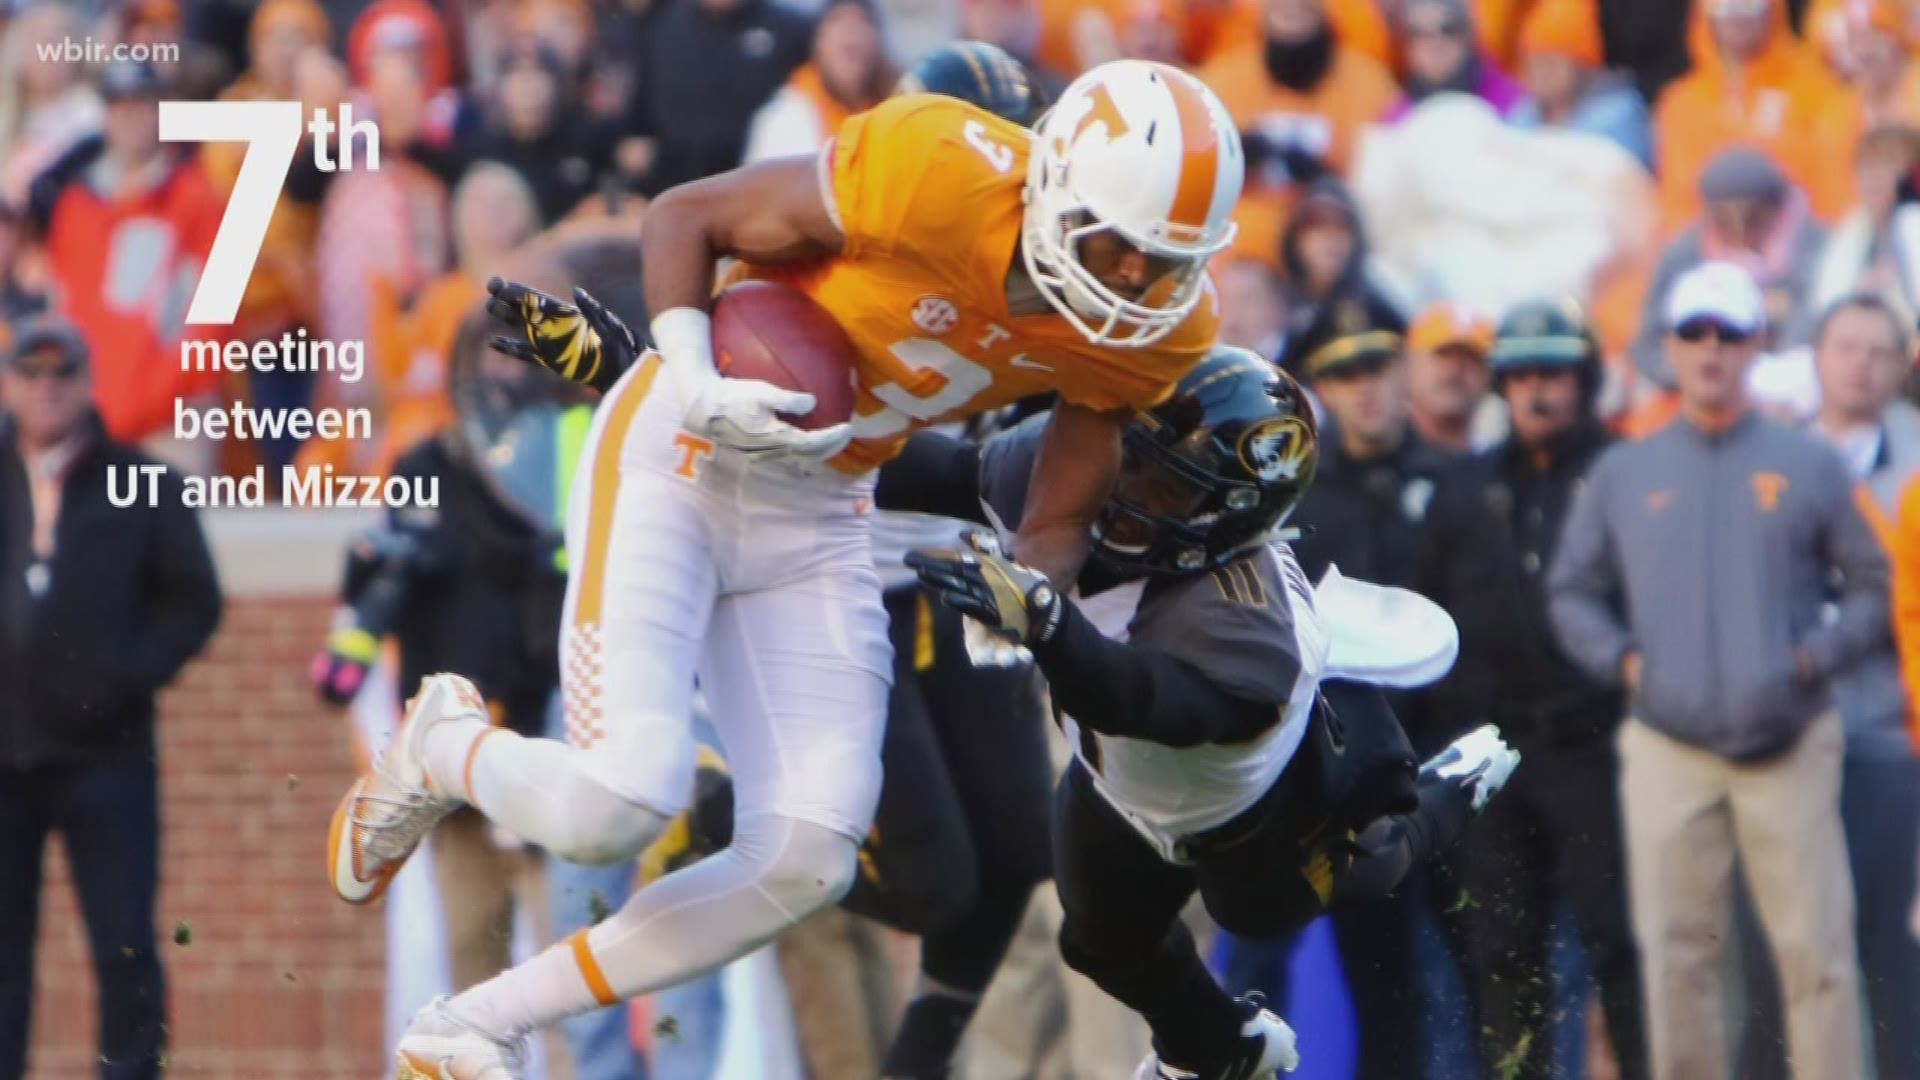 The Vols need one more win to become bowl eligible this season, and they hope to get it by beating Missouri this weekend. o